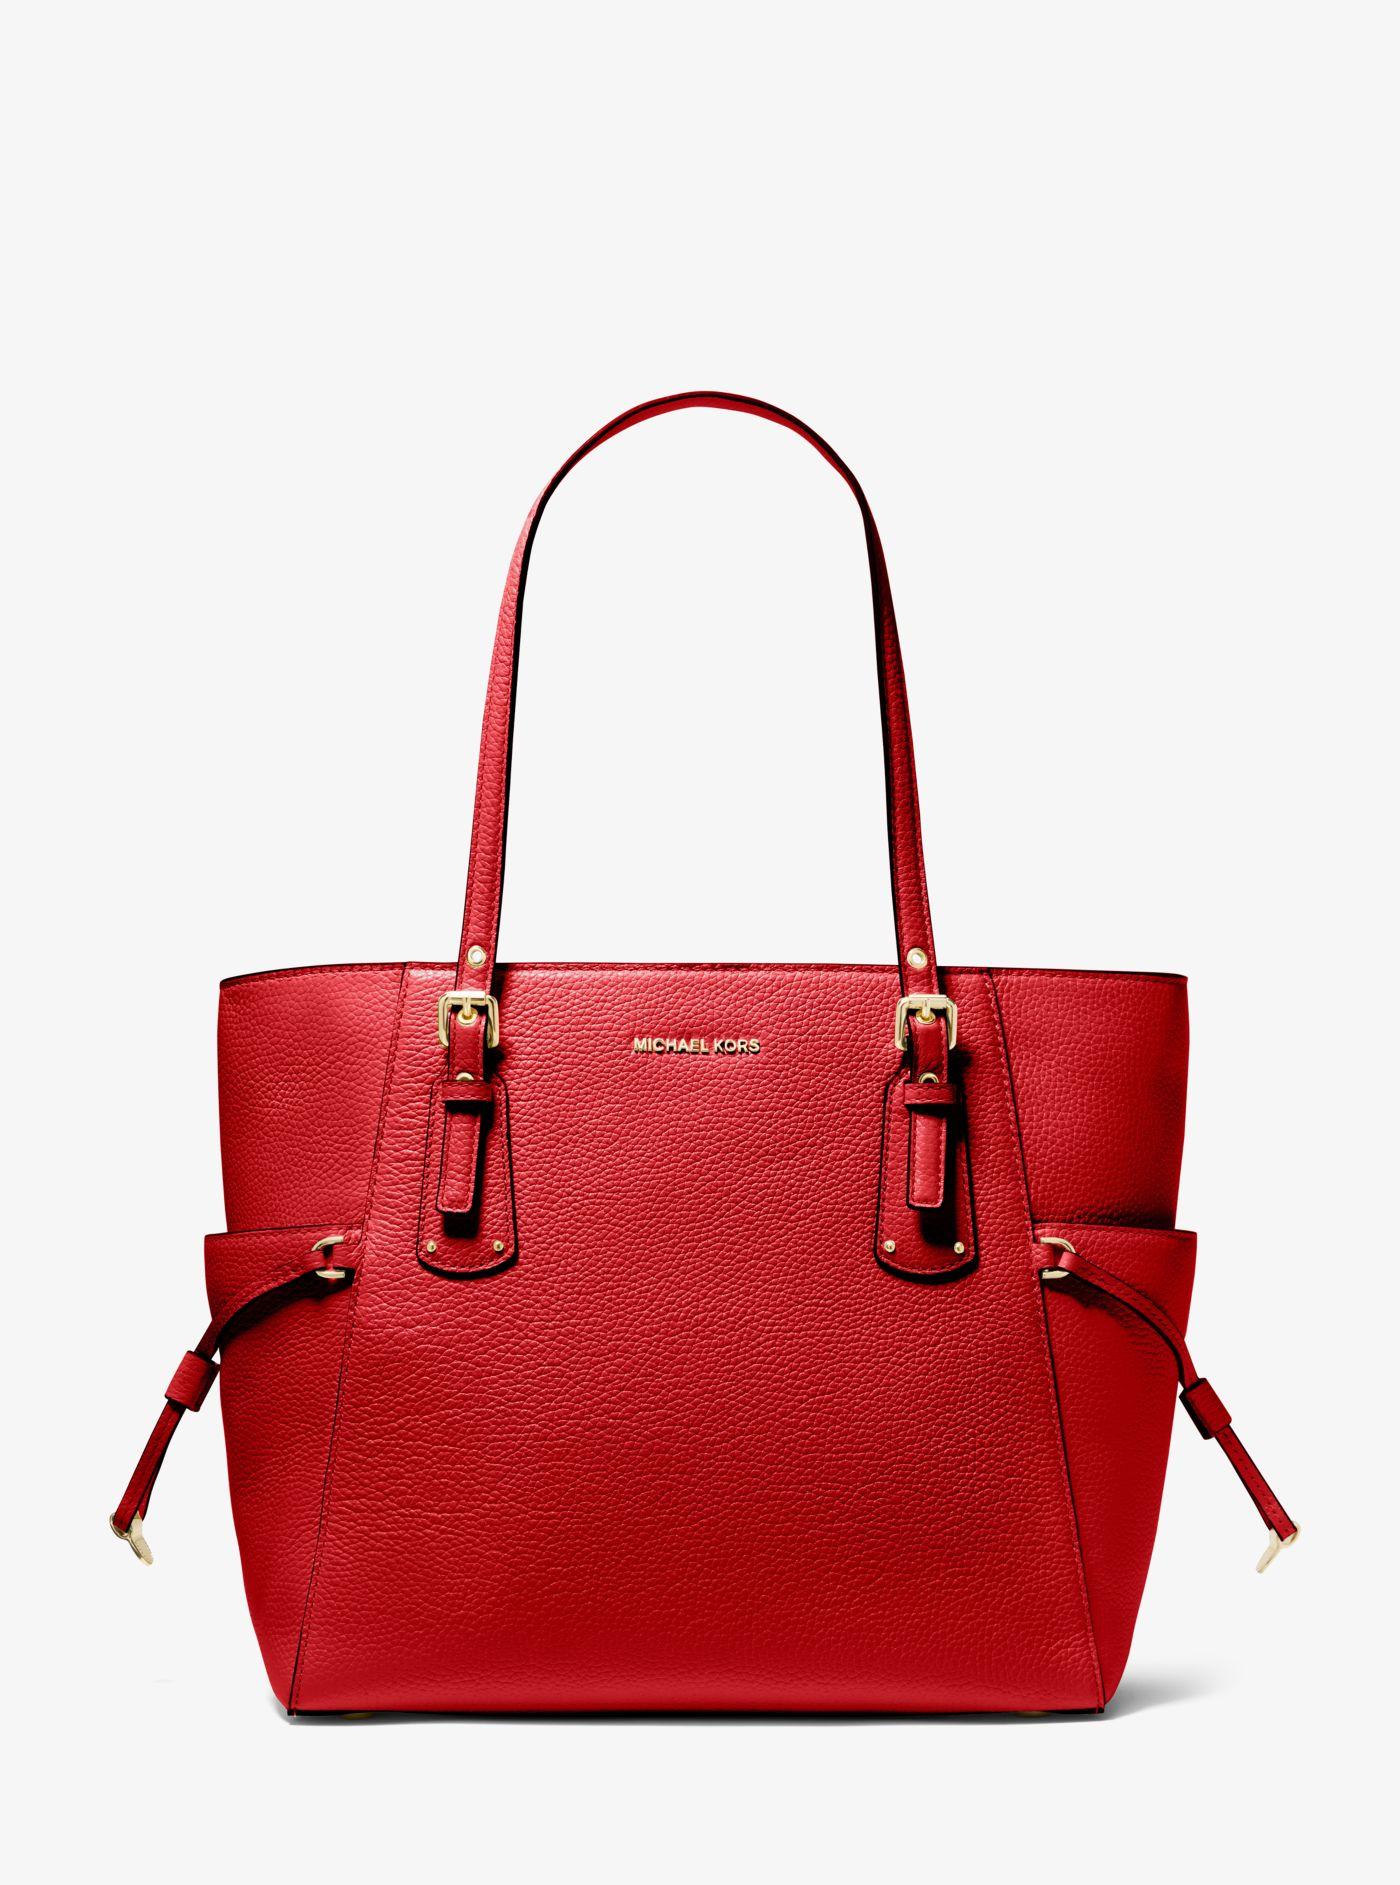 Michael Kors Voyager Small Pebbled Leather Tote Bag in Red | Lyst